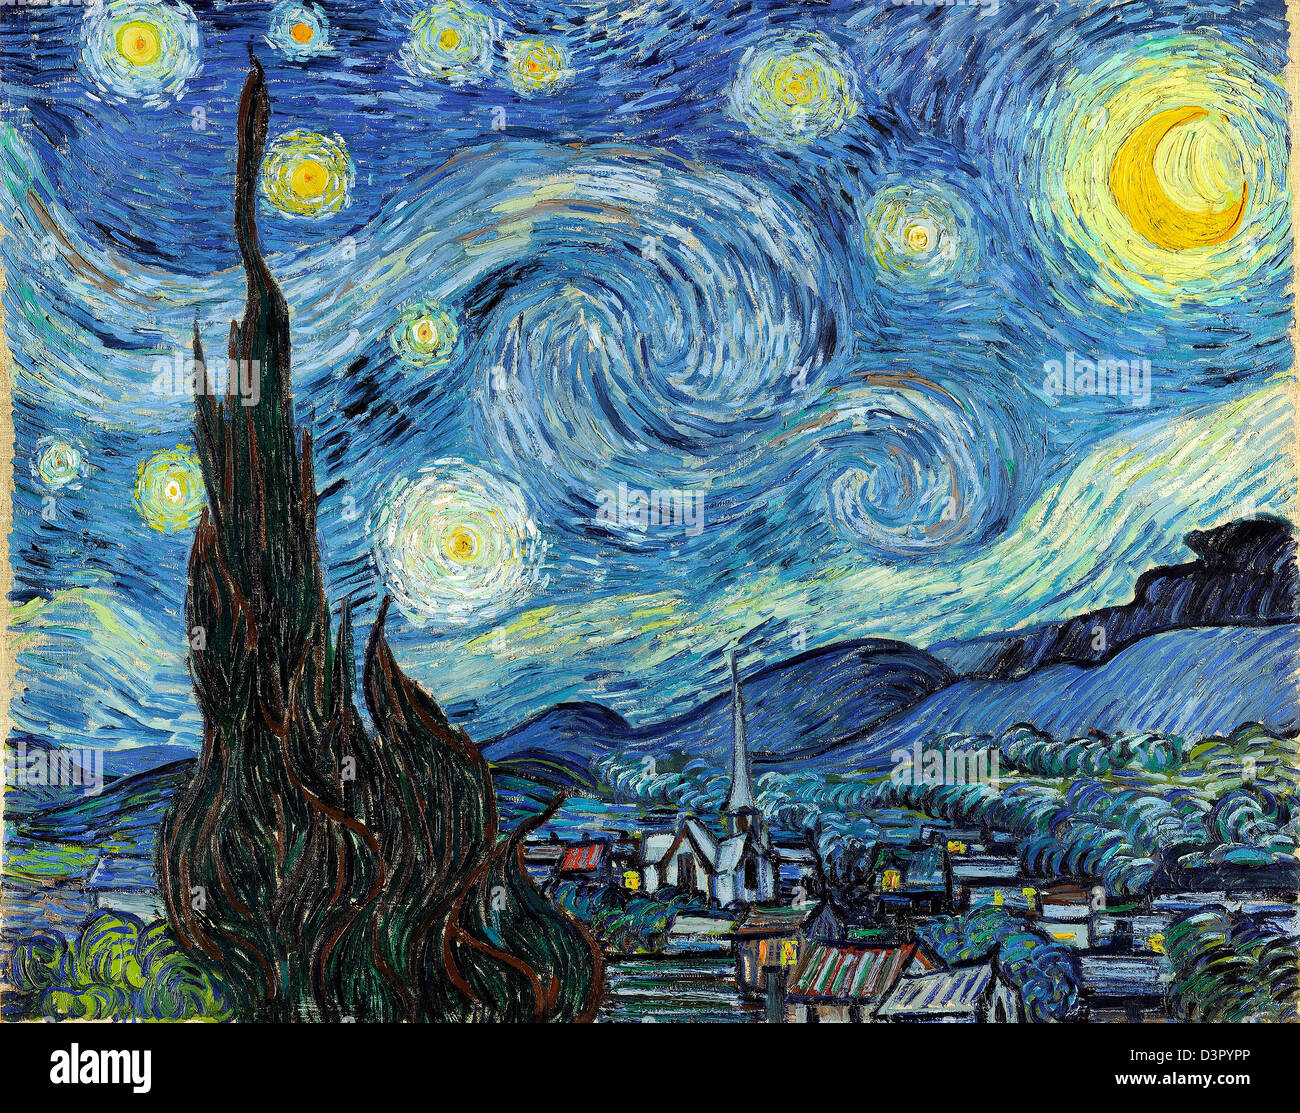 Vincent van Gogh, The Starry Night 1889 Oil on canvas. The Museum of Modern Art, New York City Stock Photo